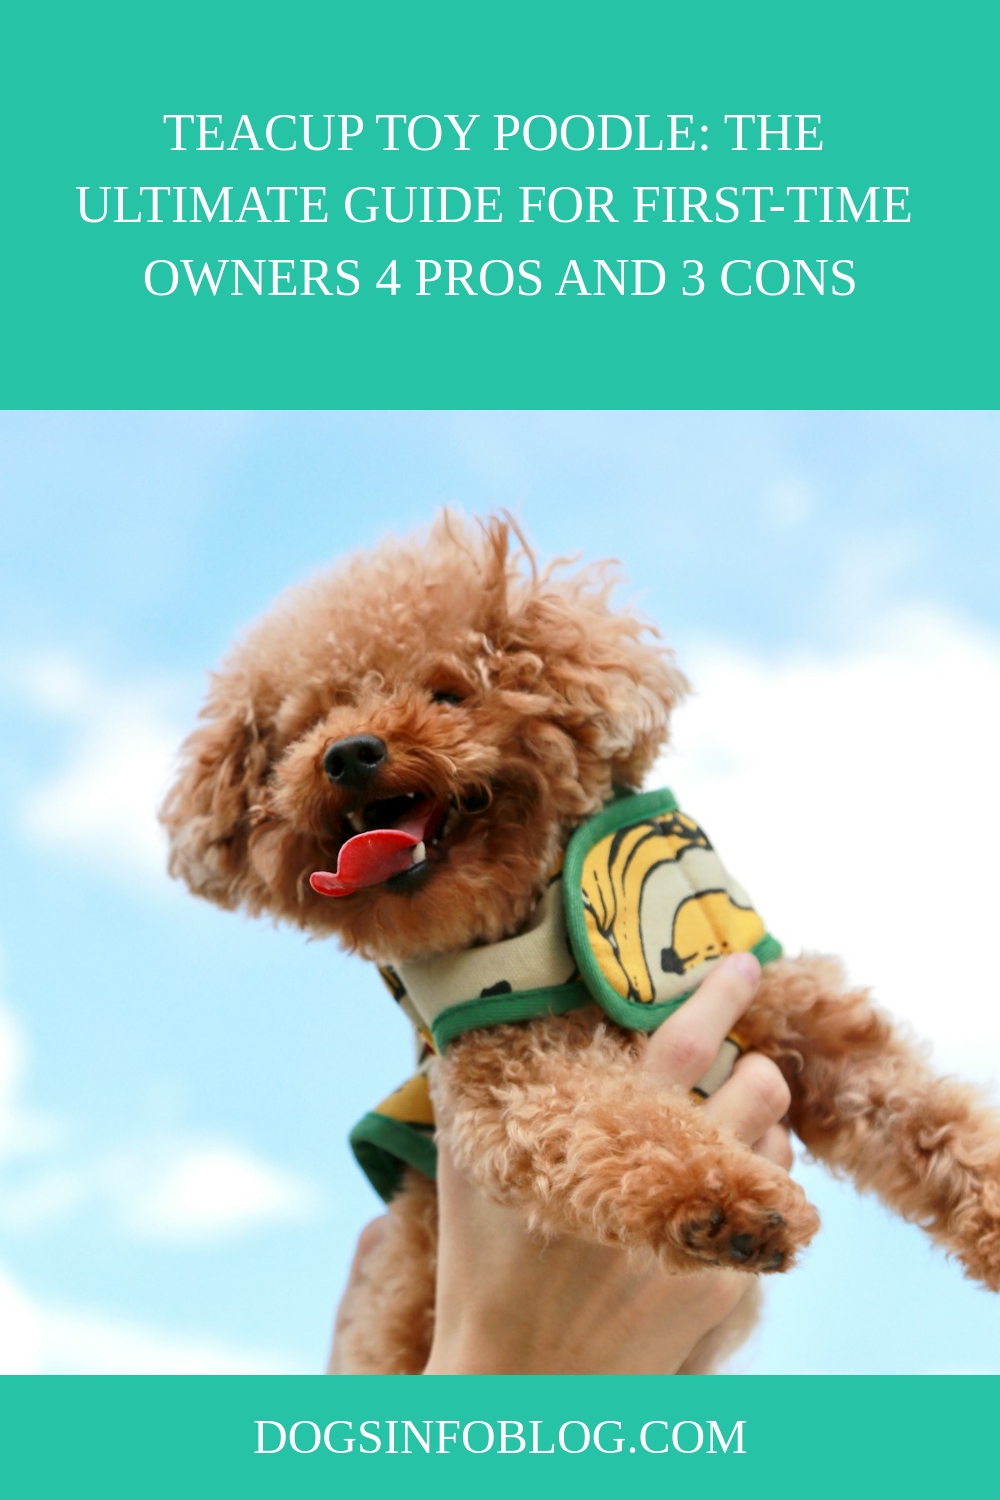 Teacup Toy Poodle The Ultimate Guide for First Time Owners 4 Pros and 3 Cons generated pin 5599